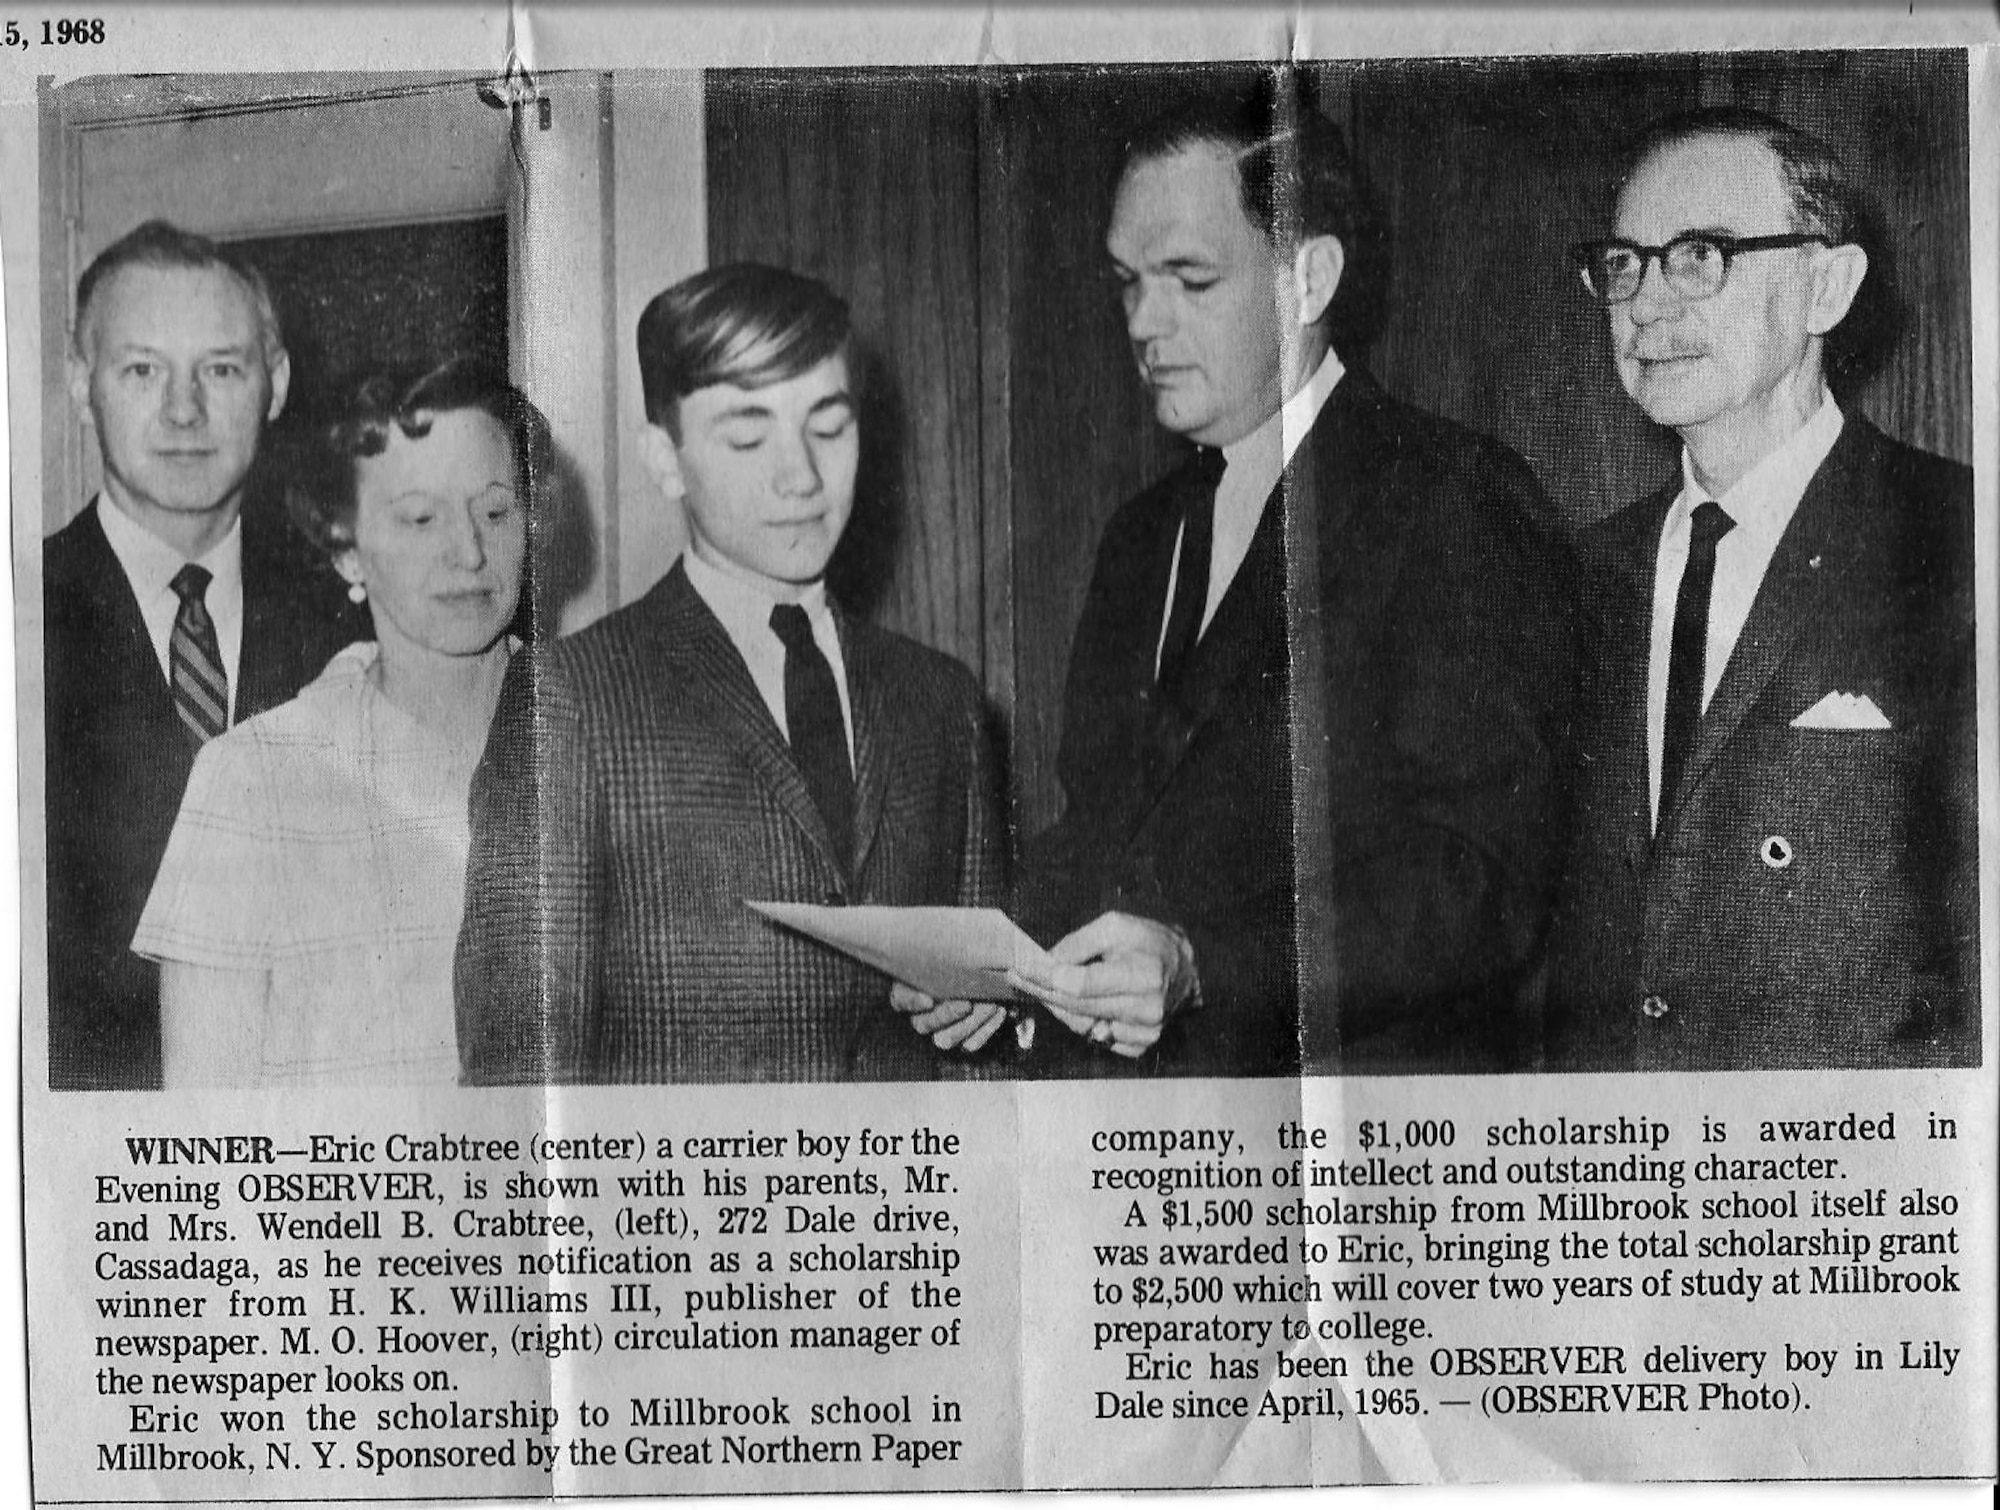 1968 caption reads:  Eric Crabtree (center) a carrier boy for the Evening Observer, is shown with his parents, Mr. and Mrs. Wendell B. Crabtree, (left), 272 Dale Drive, Cassadaga, as he received notificaiton as a scholarship winner from H. K. Williams III, publisher of the newspaper, M. O. Hoover, (right) circulation manager of the newspaper looks on.
Eric won the scholarship to Millbrook School in Millbrook, N.Y.  Sponsored by the Great Northern Paper company, the $1,000 scholarship is awarded in recognition of intellect and outstanding character.
A $1,500 scholarship from Millbrook School itself also was awarded to Eric, bringing the total scholarship grant to $2,500 which will cover two years of study at Millbrook, preparatory to college.
Eric has been the Observer delivery boy in Lily Dale since April, 1965.